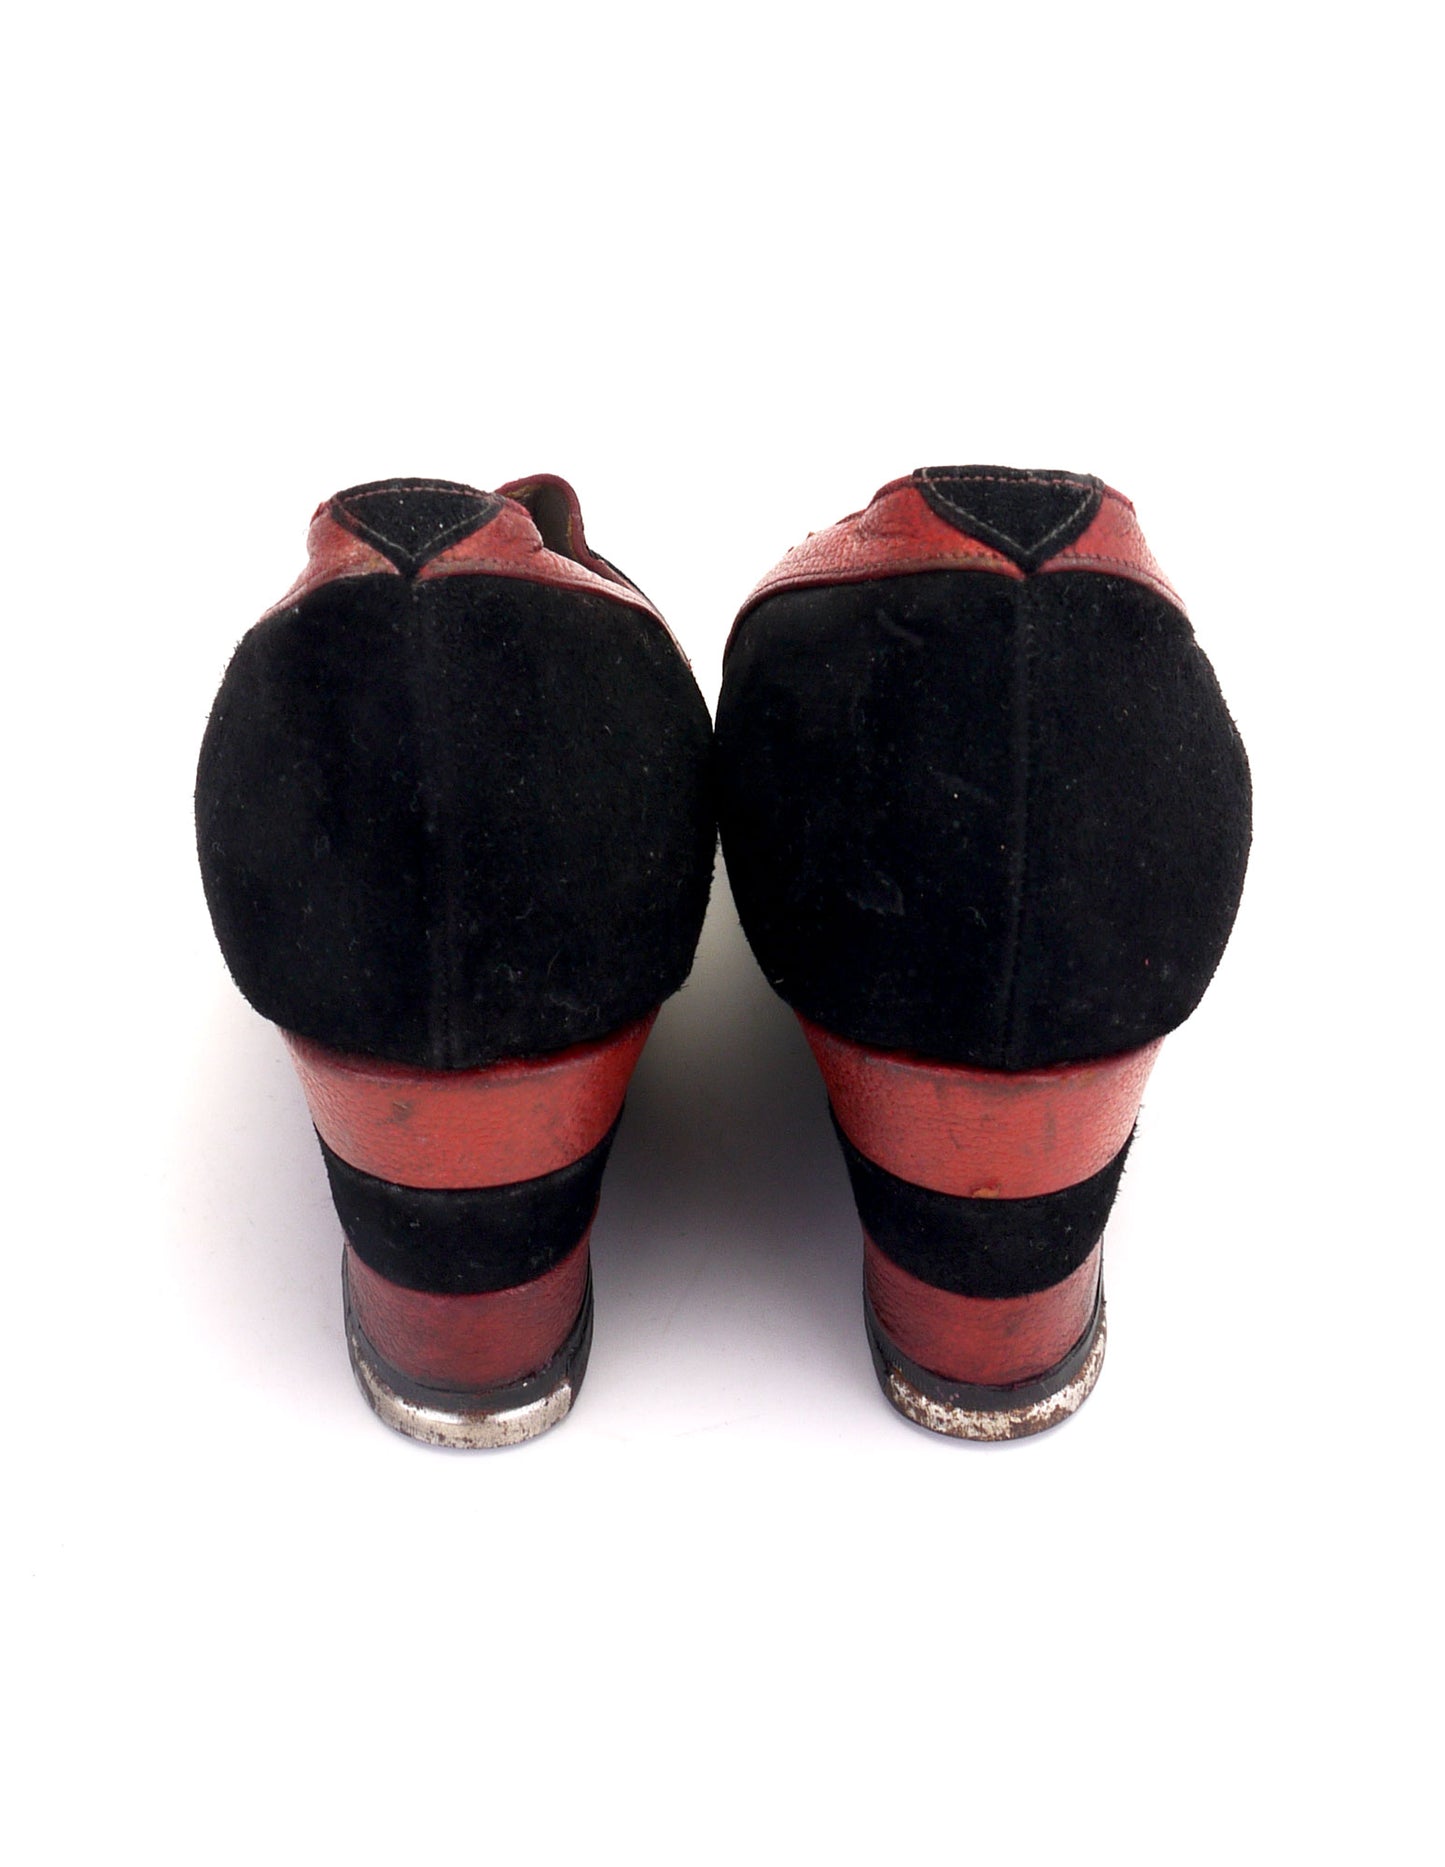 Red & Black Early 1940s Wedge Shoes by Sperope UK 4.5